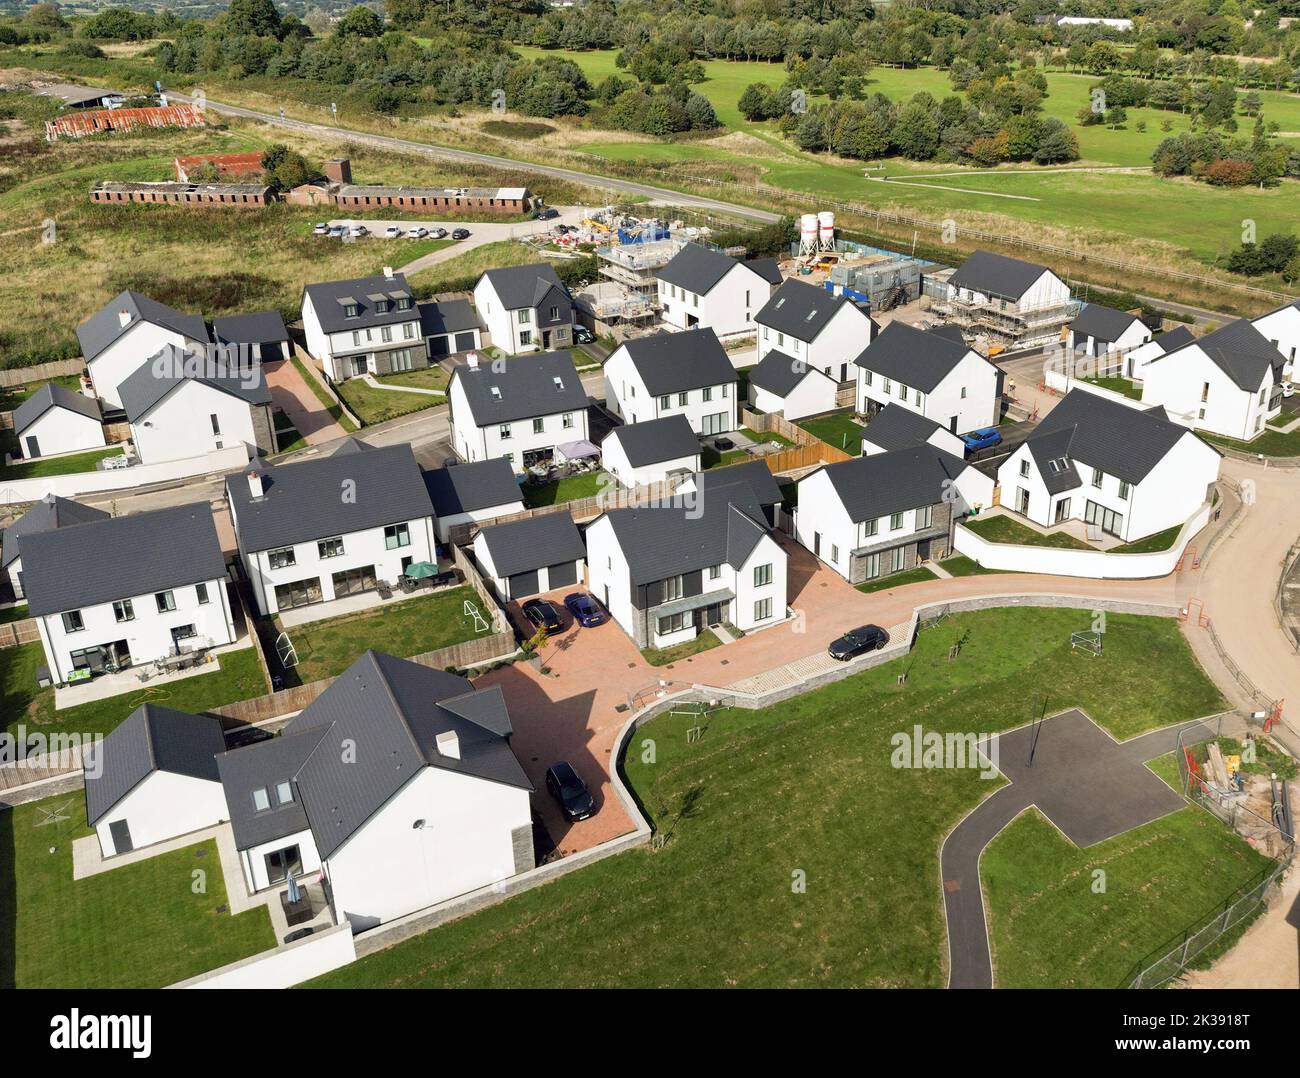 Bonvilston, Vale of Glamorgan, Wales - September 2022: Aerial view of a new development of luxury detached houses on the outskirts of Cardiff. Stock Photo